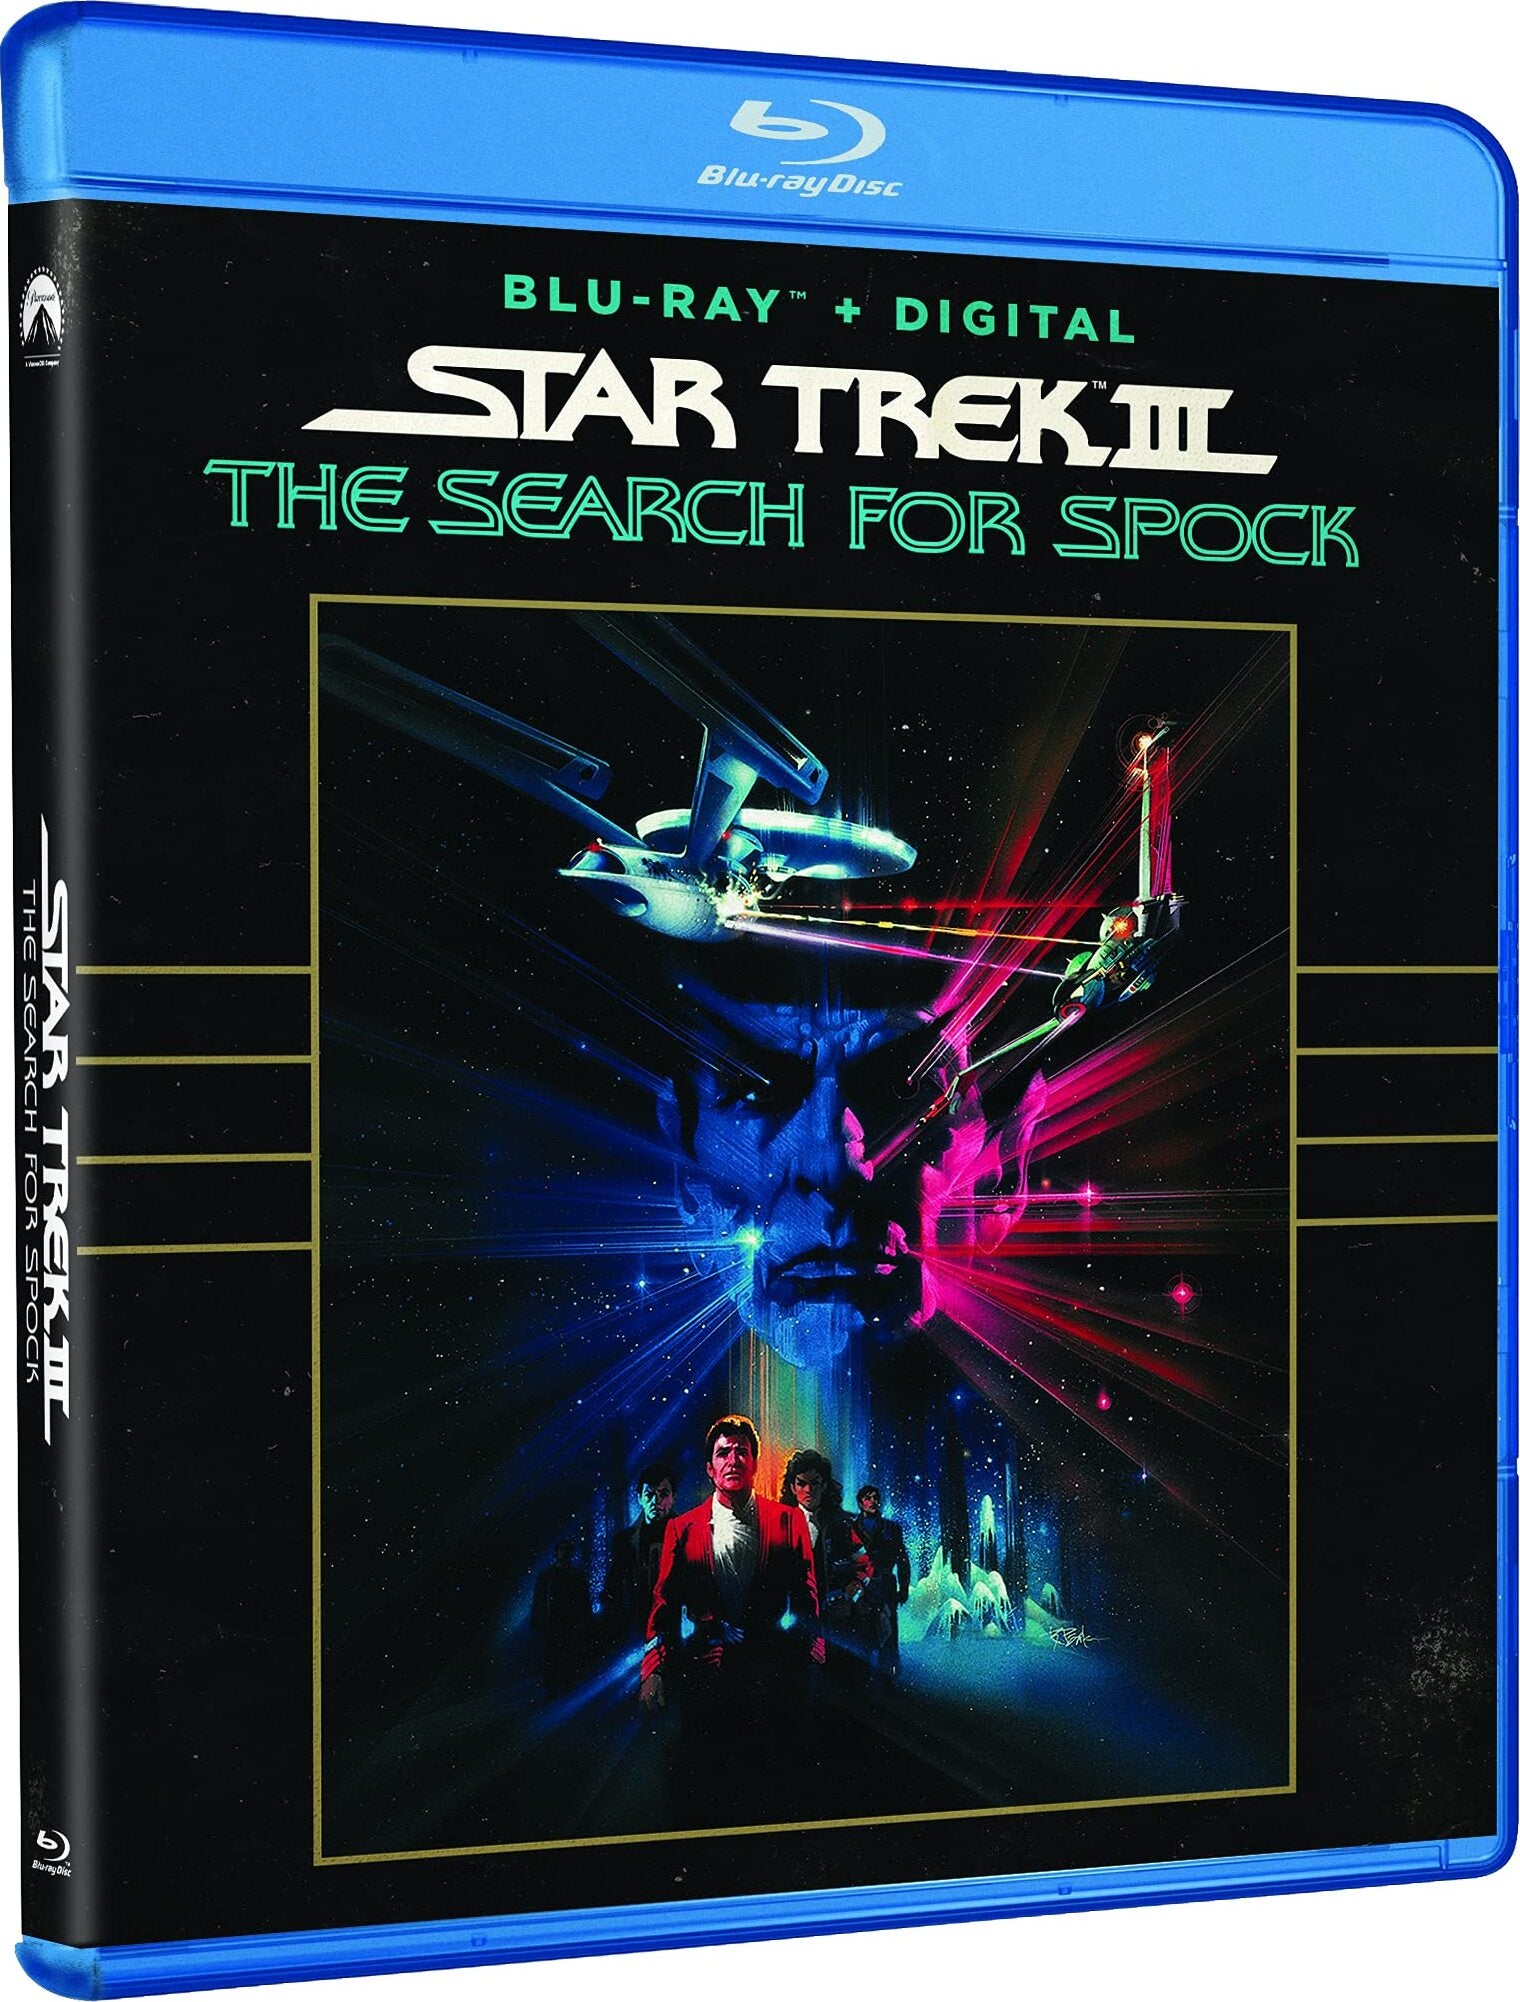 STAR TREK III: THE SEARCH FOR SPOCK BLU-RAY